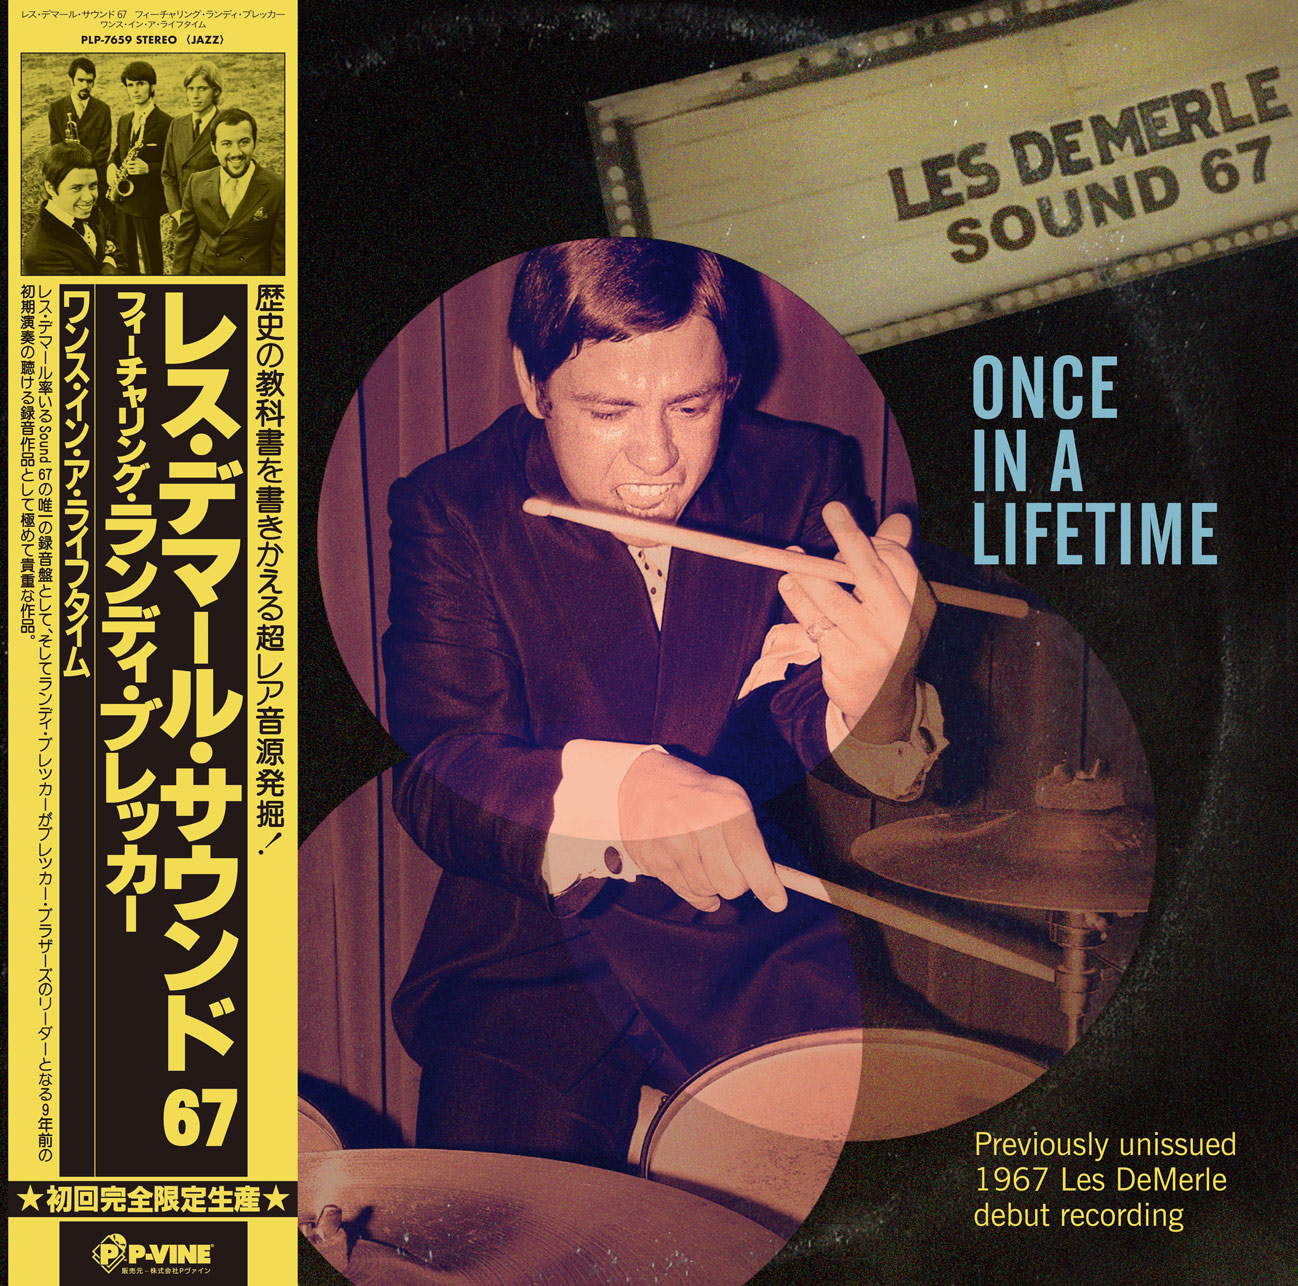 Les Demerle Sound 67 featuring Randy Brecker「Once In A Lifetime」